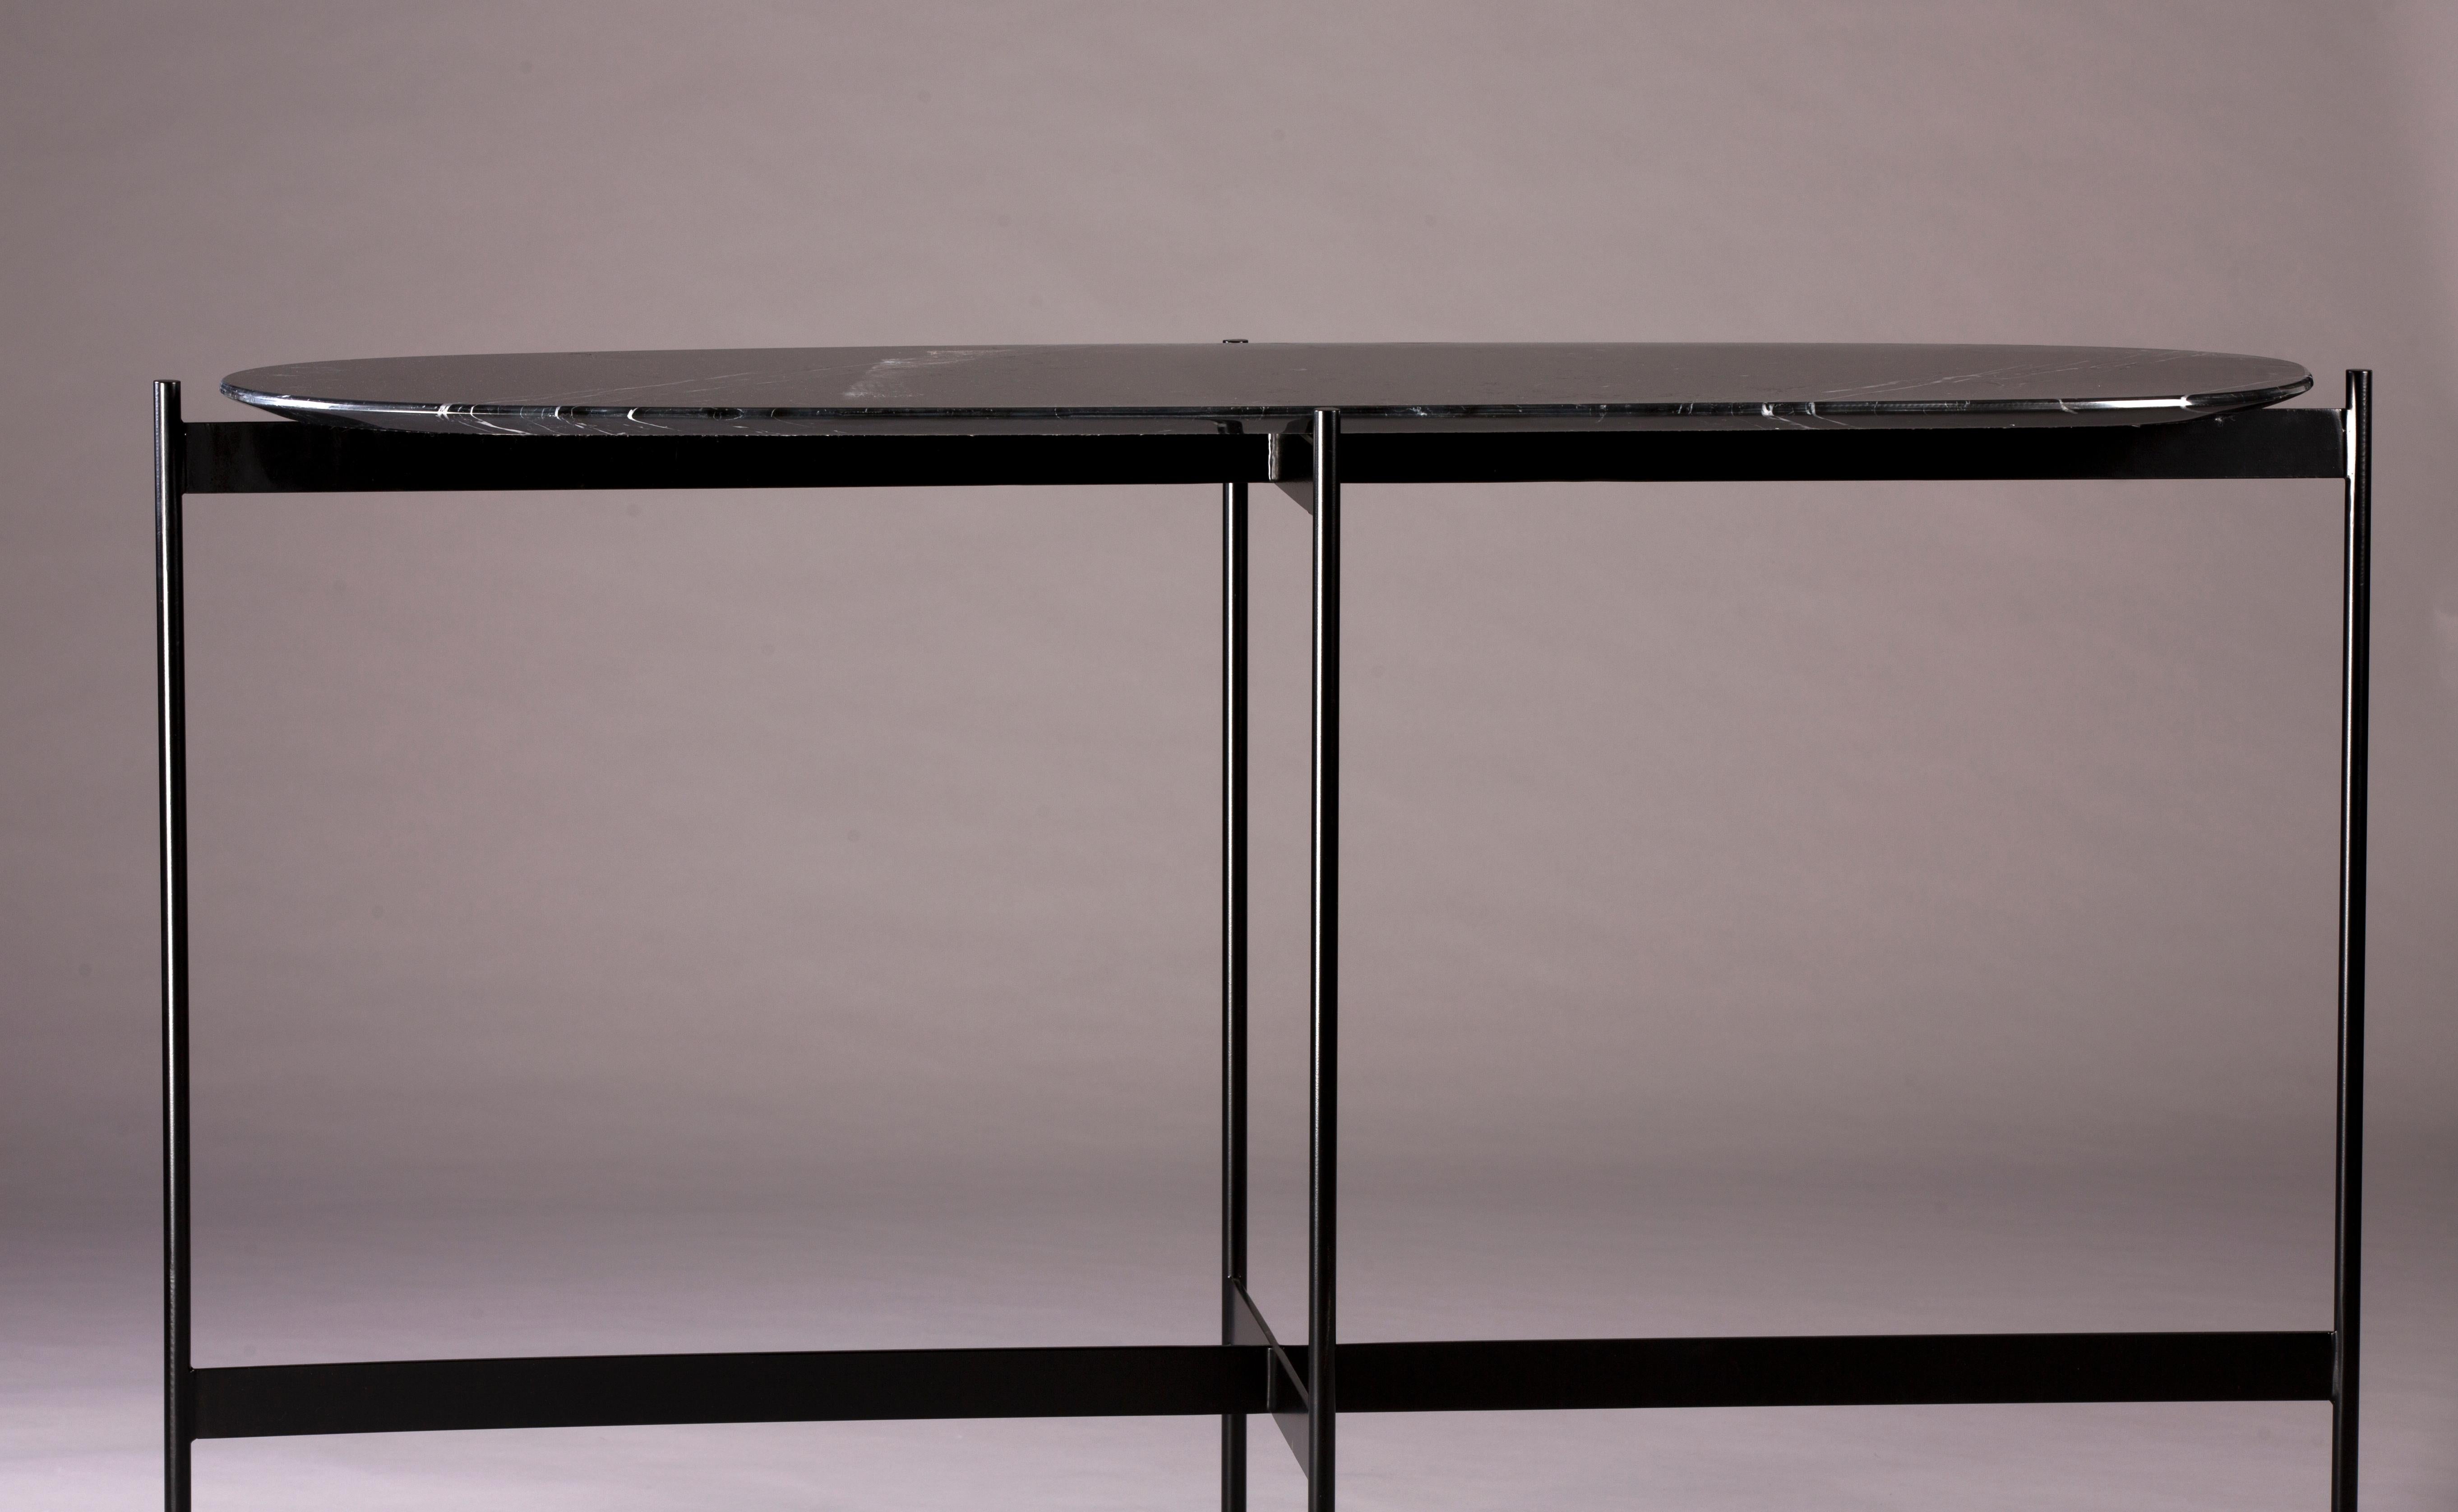 Tas console by Rectangle Studio
Dimensions: W 125 x D 45 x H 75 cm 
Materials: Black marble, black paint coating on metal

The table is shaped and finished by the designer. For this reason, each table has different and distinctive edge finishes.